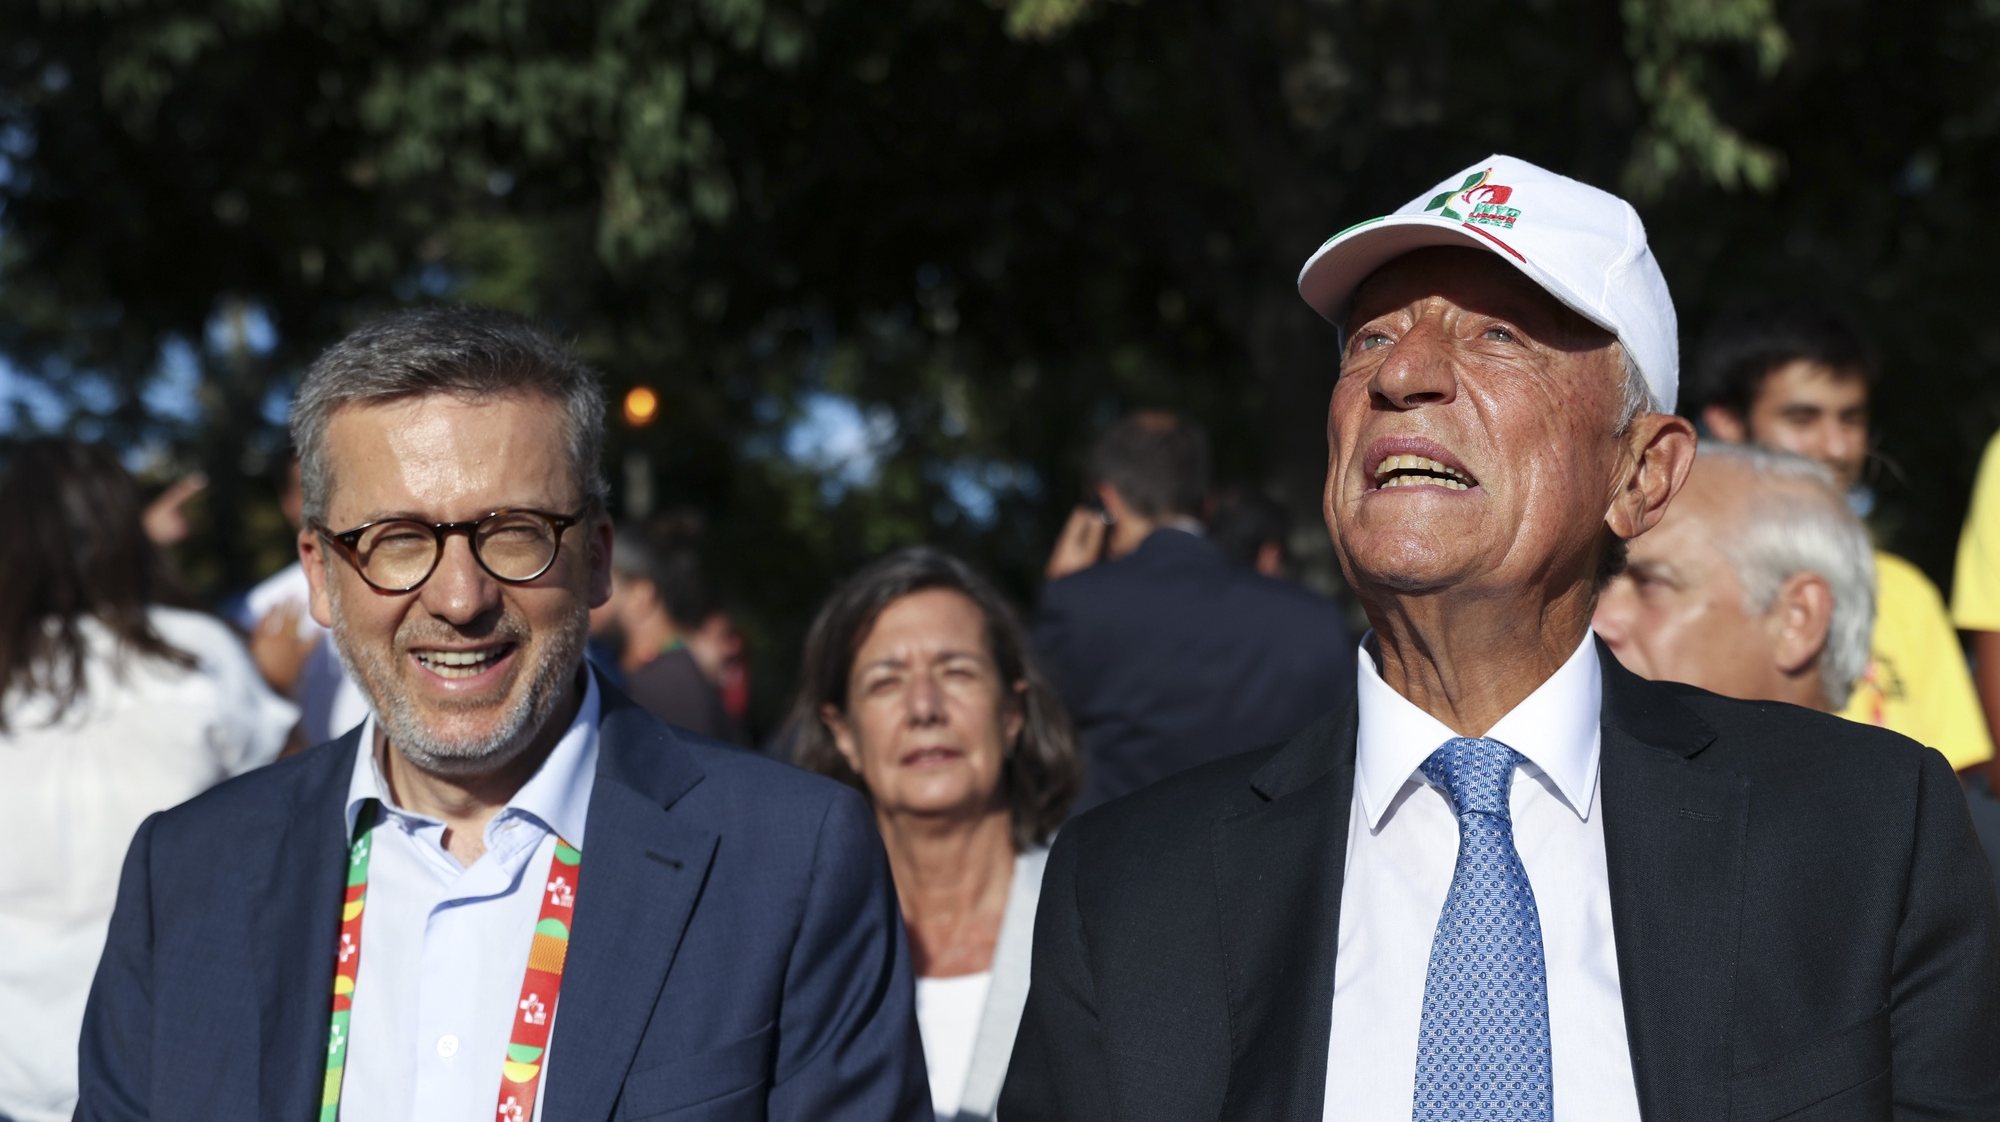 Portuguese President Marcelo Rebelo de Sousa (R) accompanied by Lisbon Mayor Carlos Moedas (L) on arrival to take part in the opening mass on the first day of the World Youth Day (WYD), in Lisbon, Portugal, 01 August 2023. The Pontiff will be in Portugal on the occasion of World Youth Day (WYD), one of the main events of the Church that gathers the Pope with youngsters from around the world, that takes place untill 06 August. MIGUEL A. LOPES/LUSA/POOL